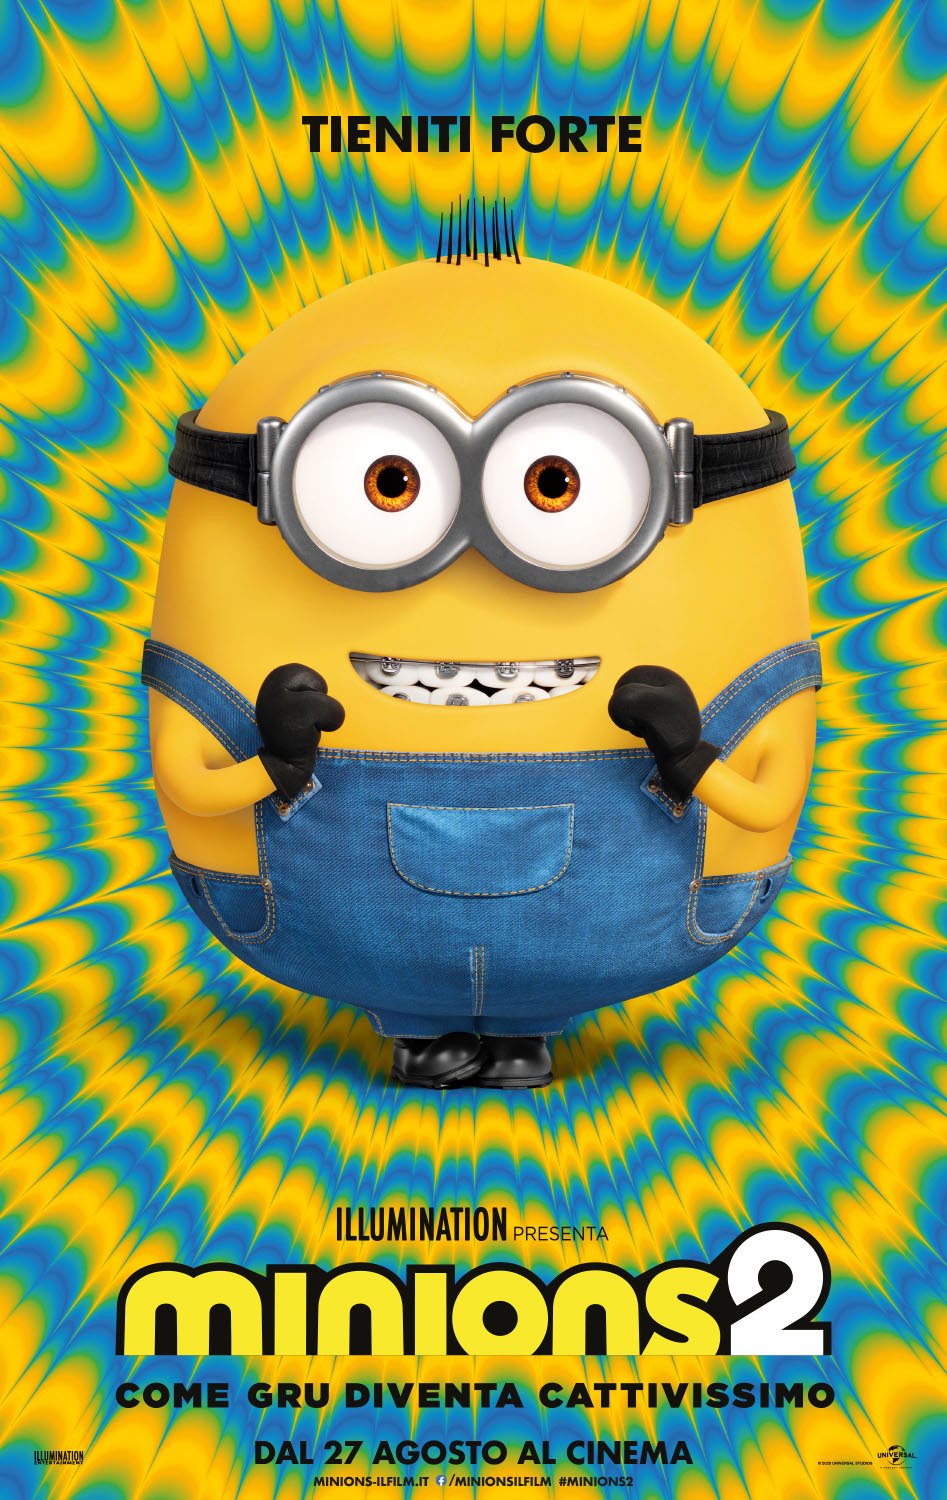 The Minions in the Italian teaser poster